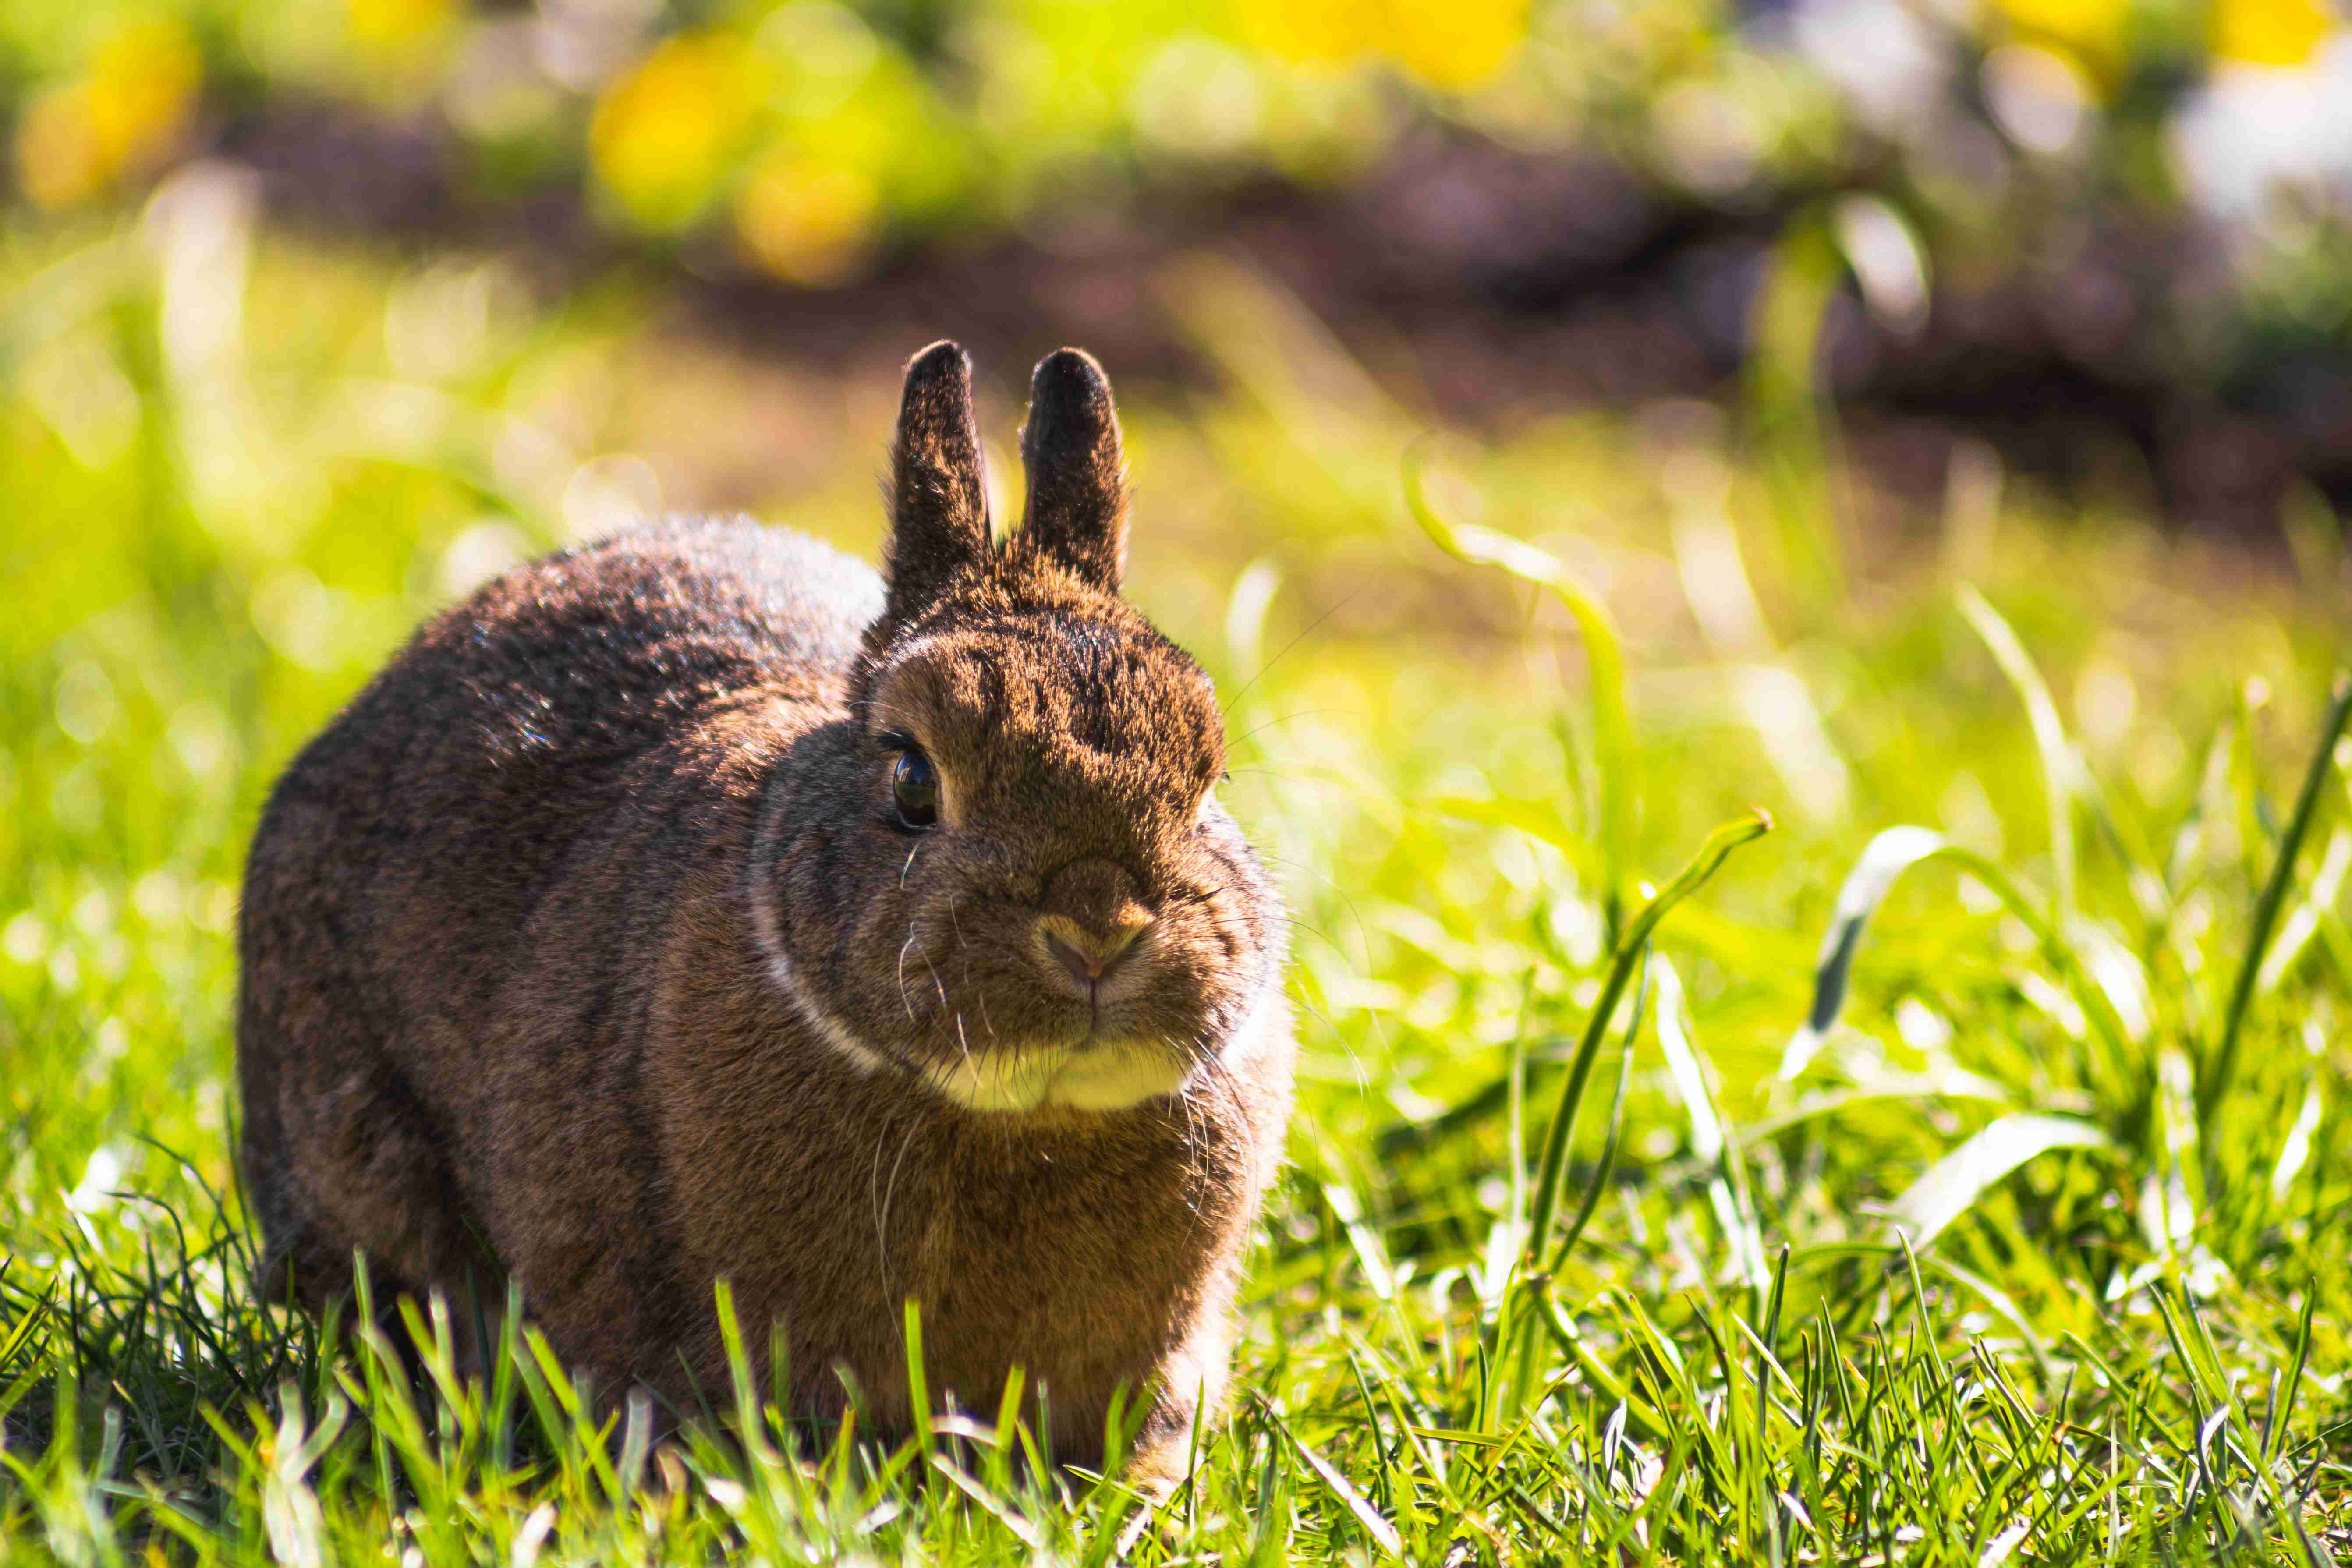 10 Common Signs of Illness or Distress in Rabbits: How to Recognize and Respond